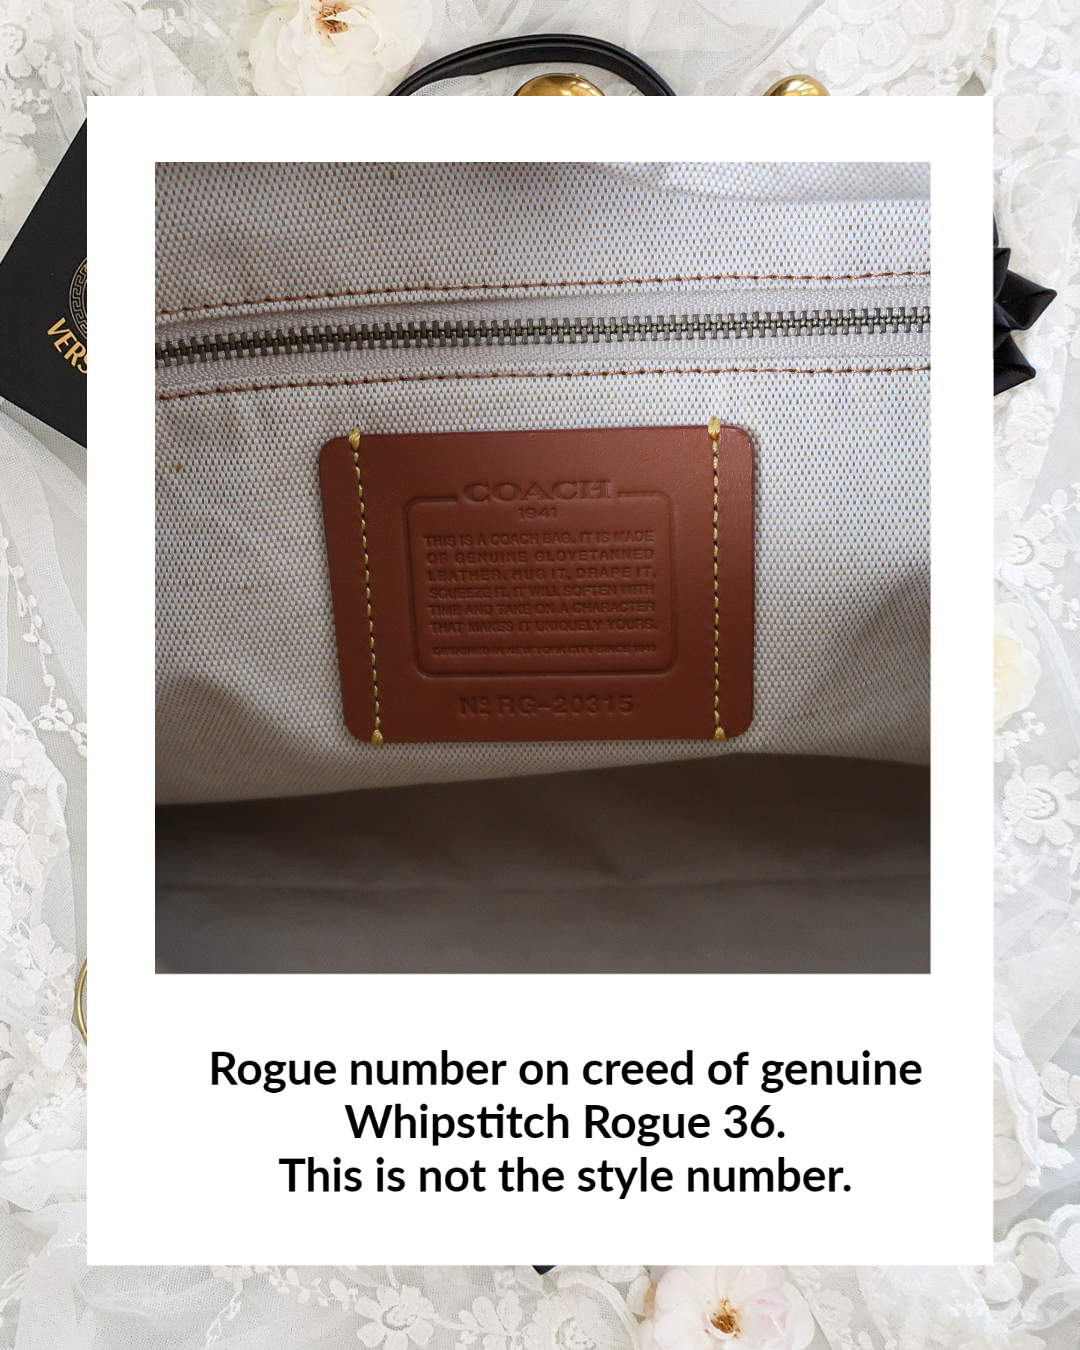 Rogue 31 whipstitch creed patch early Rogue number RG